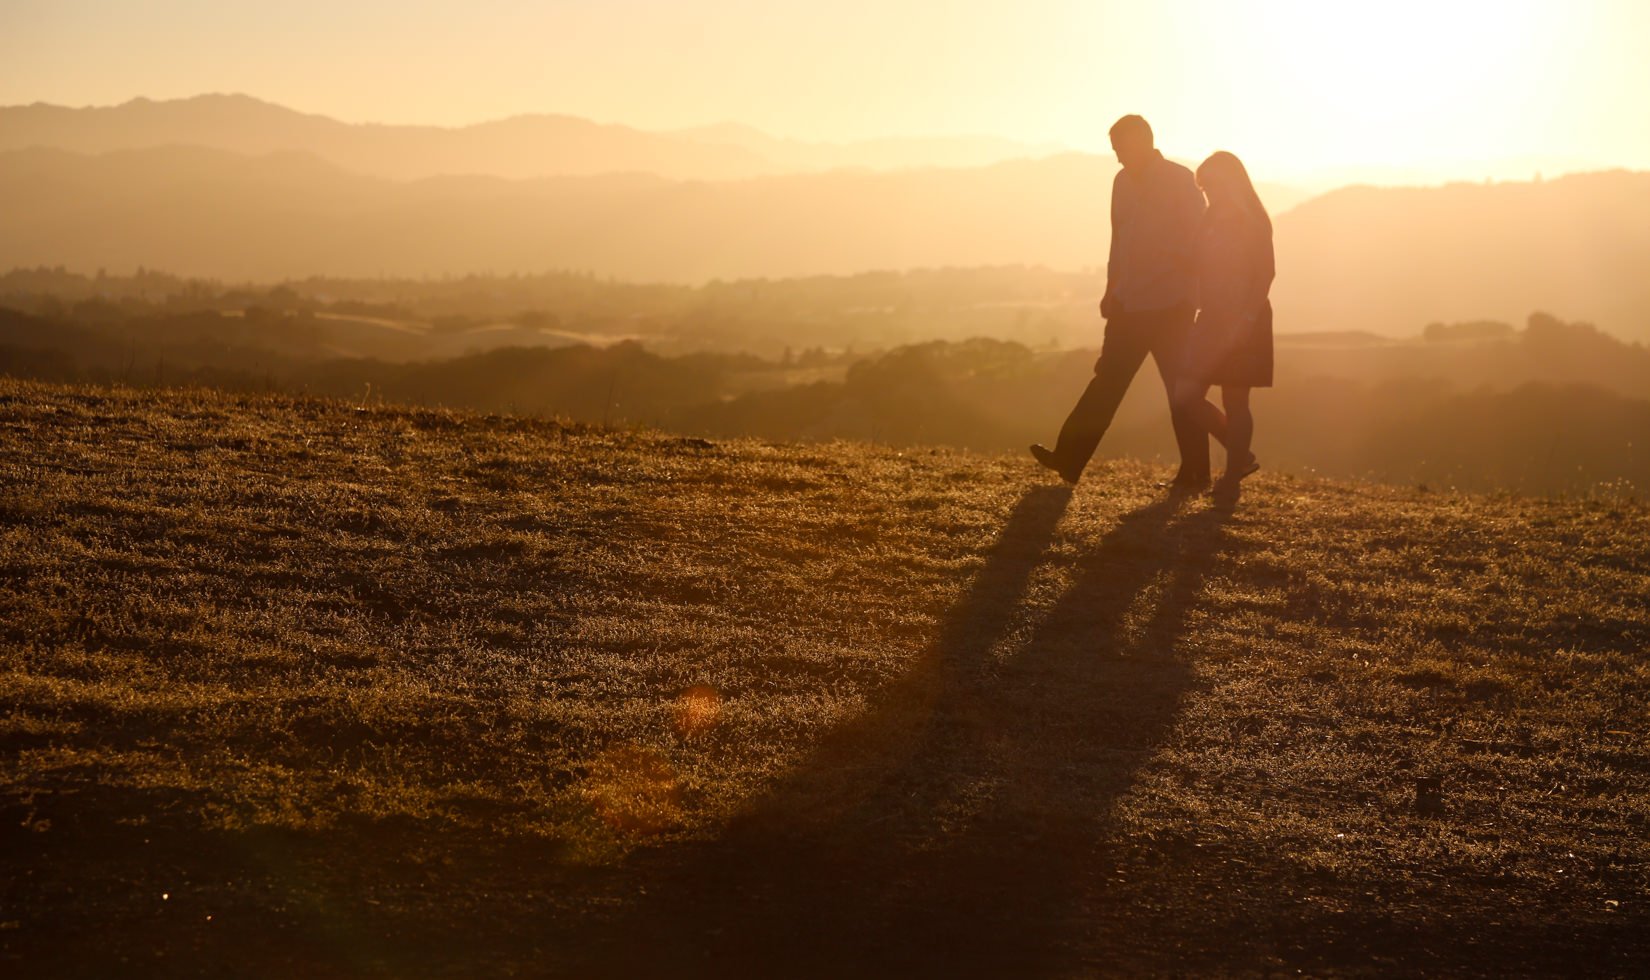 A couple walks hand-in-hand with the sunset in the background.